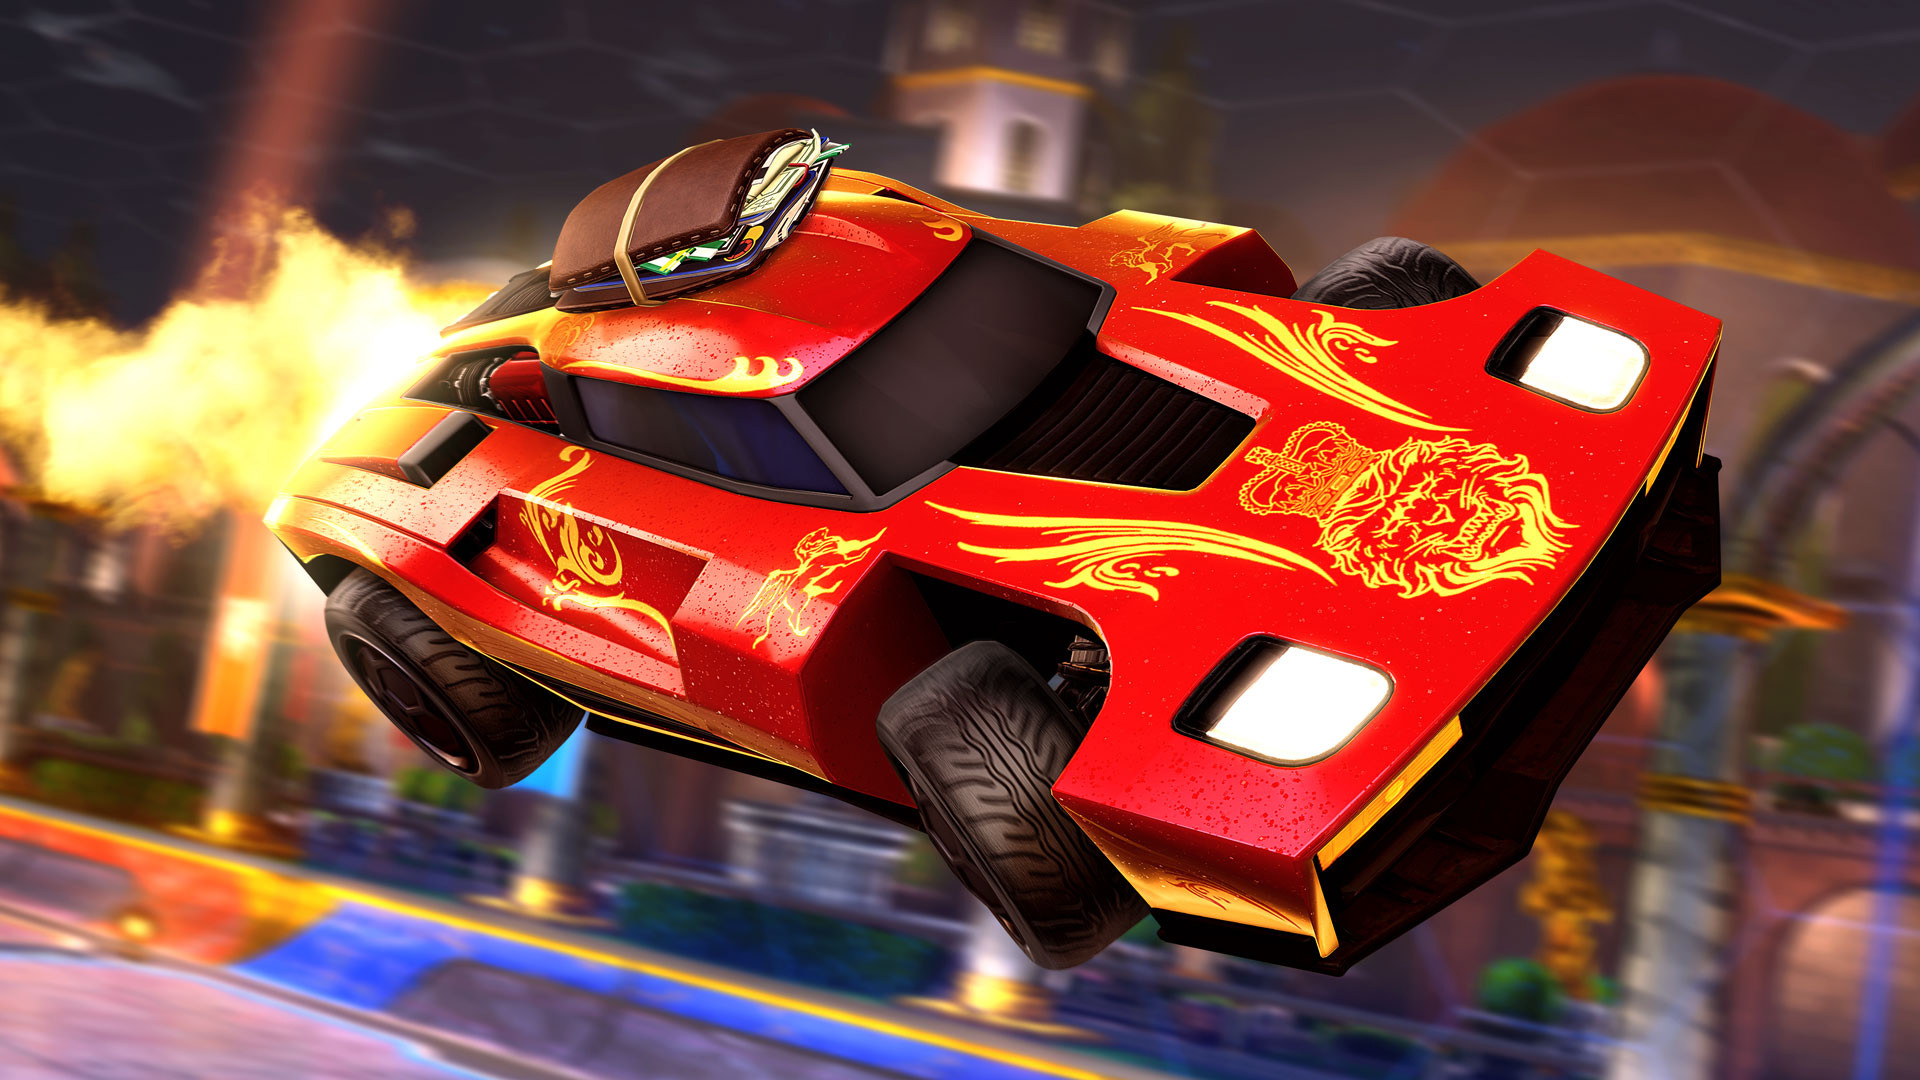 HUGE TOURNAMENT UPDATE!! (Rewards,Currency And More) - Rocket League Update  